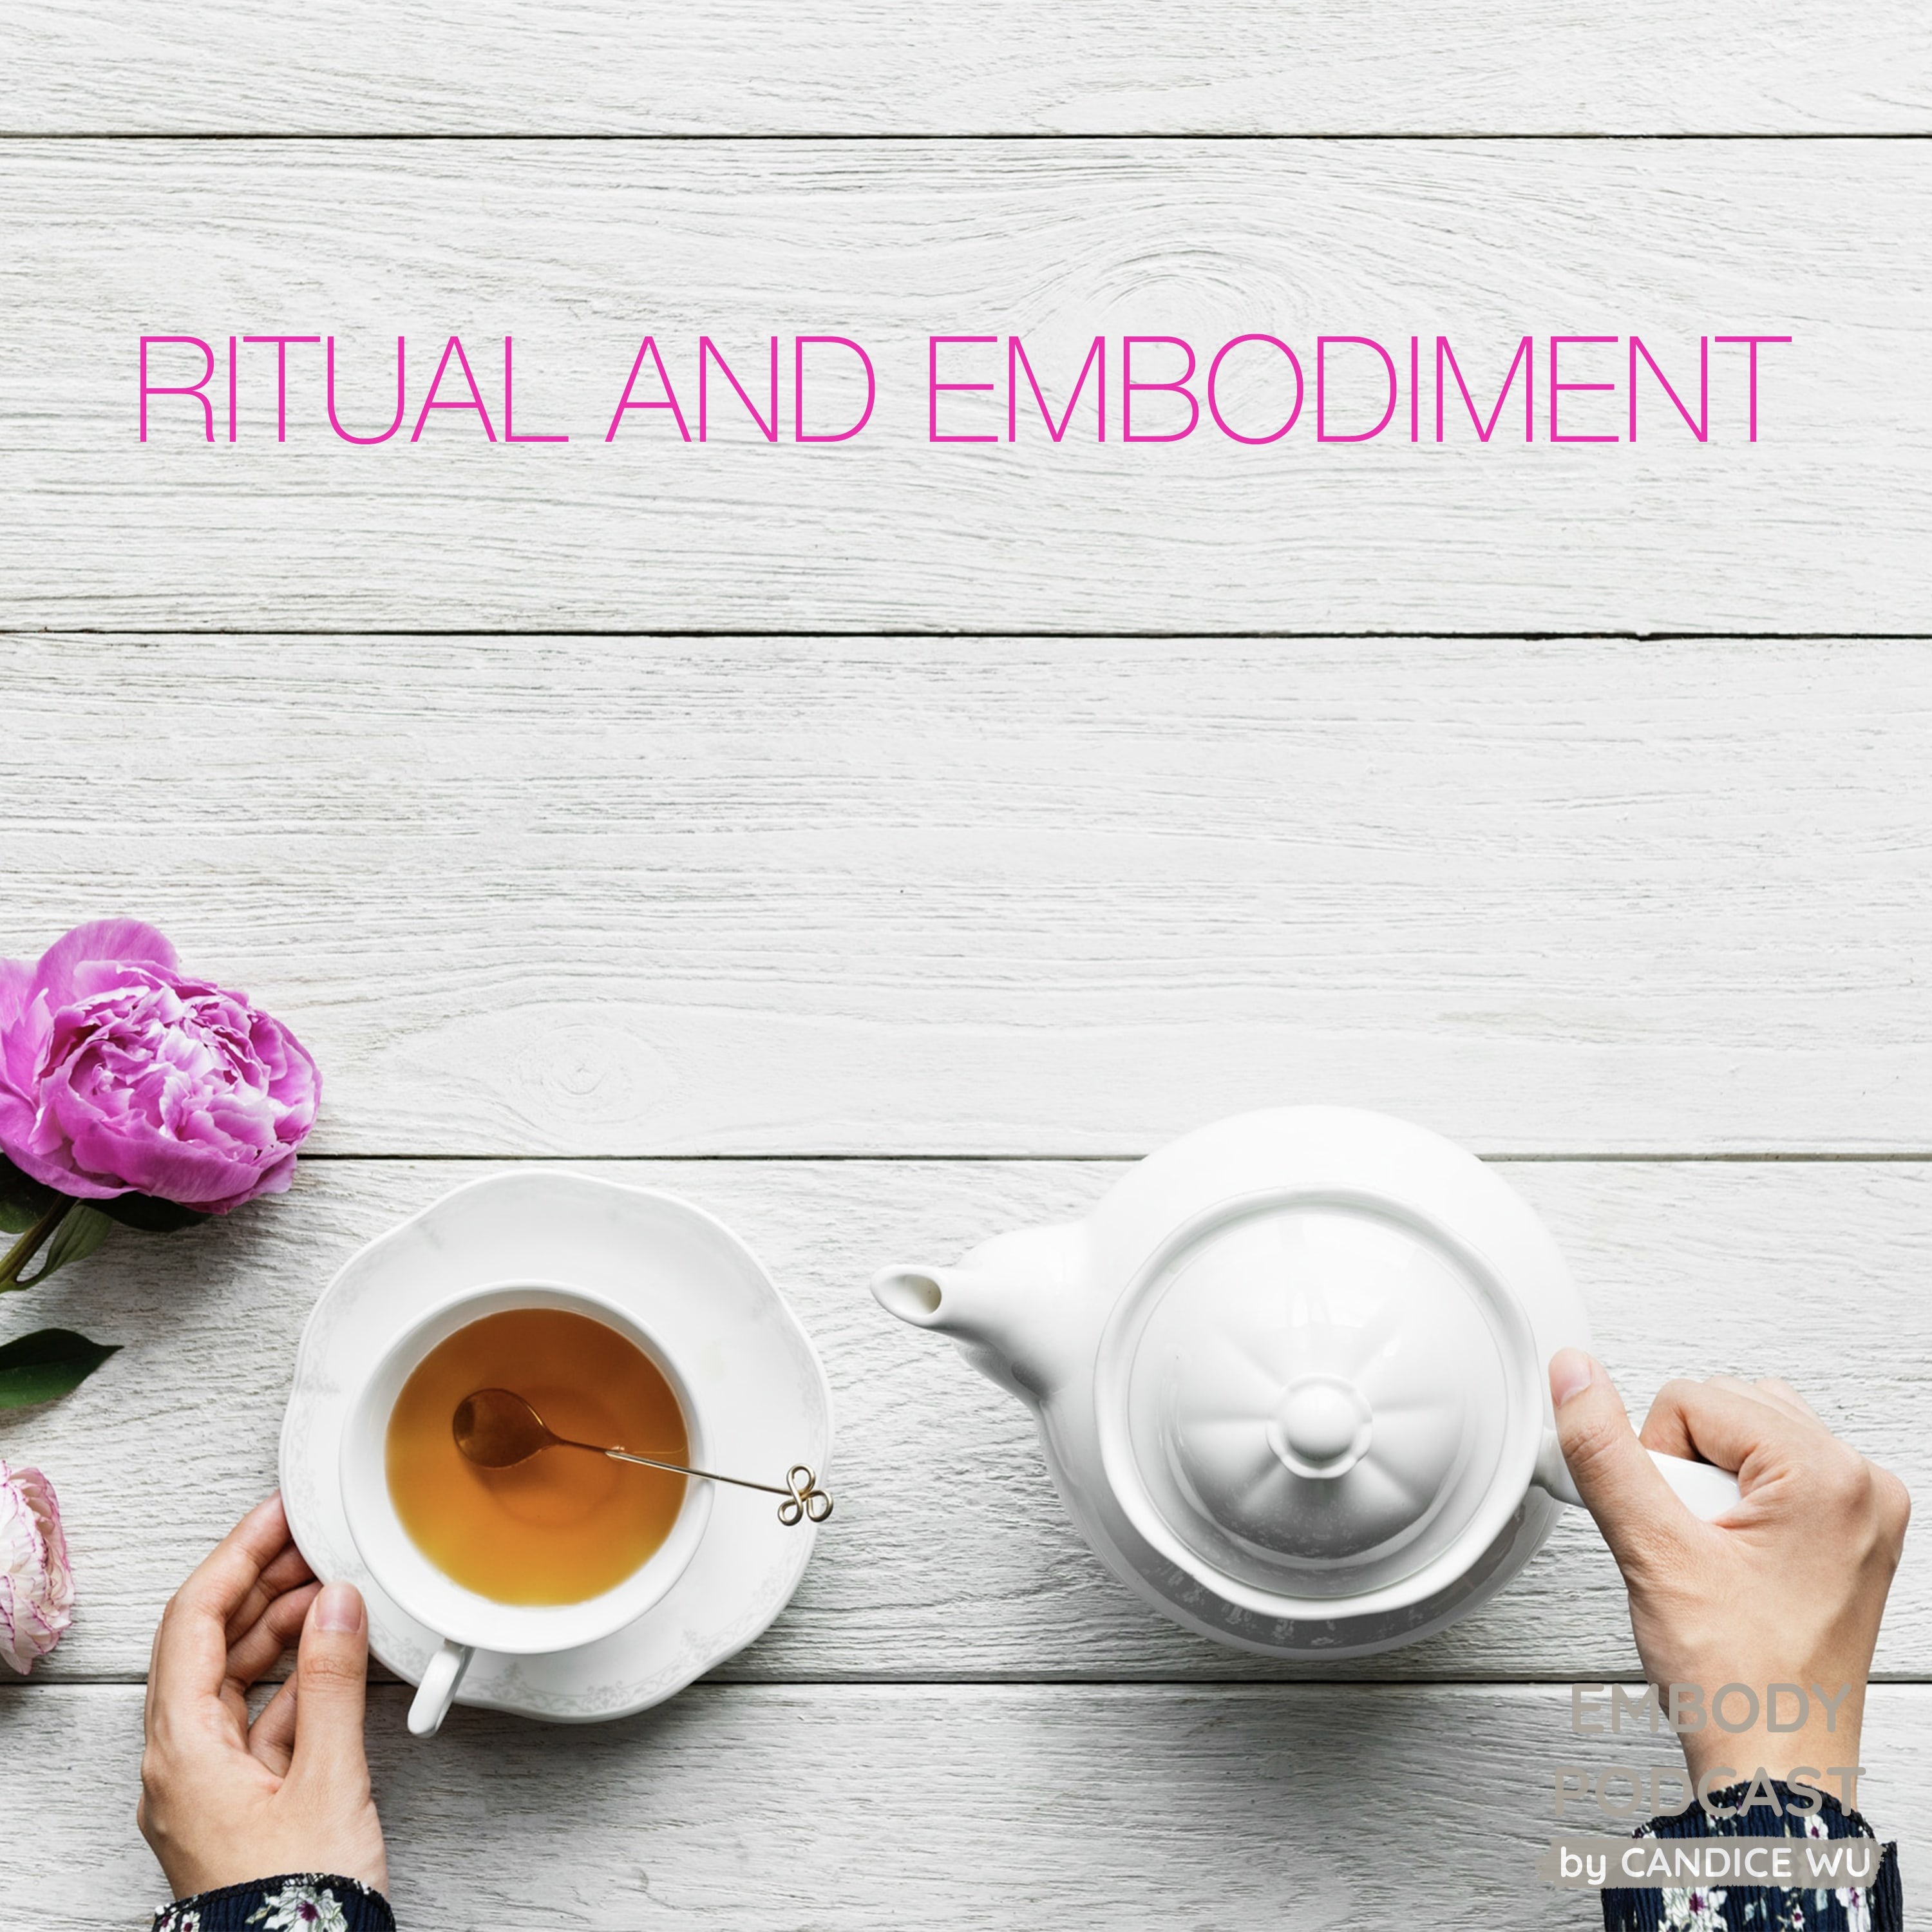 55: Ritual and Embodiment